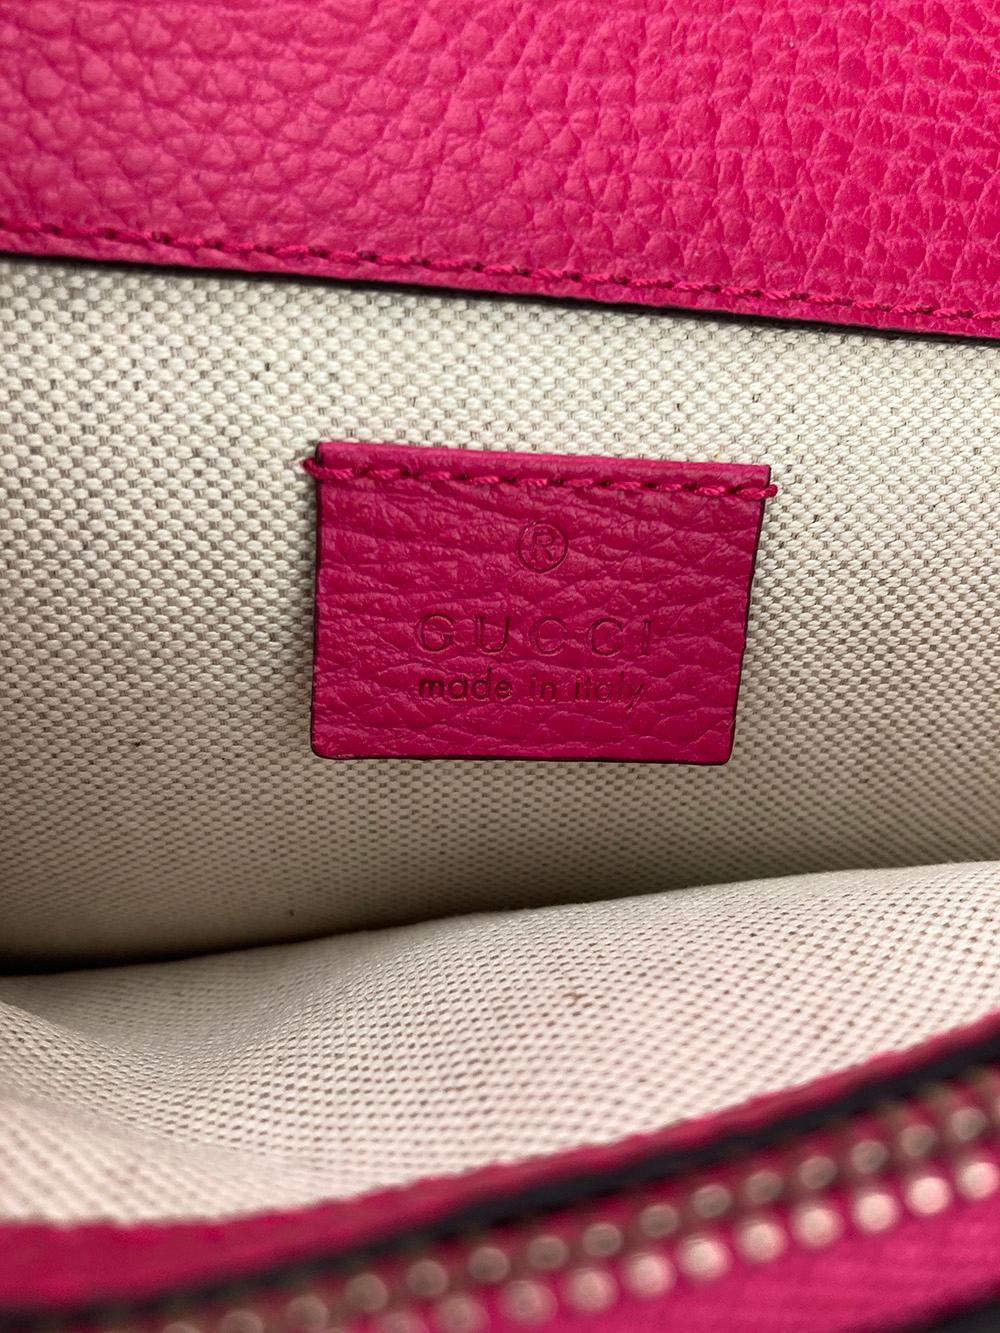 Gucci Dionysus Pink Guccify Small Shoulder Bag NWOT For Sale 4